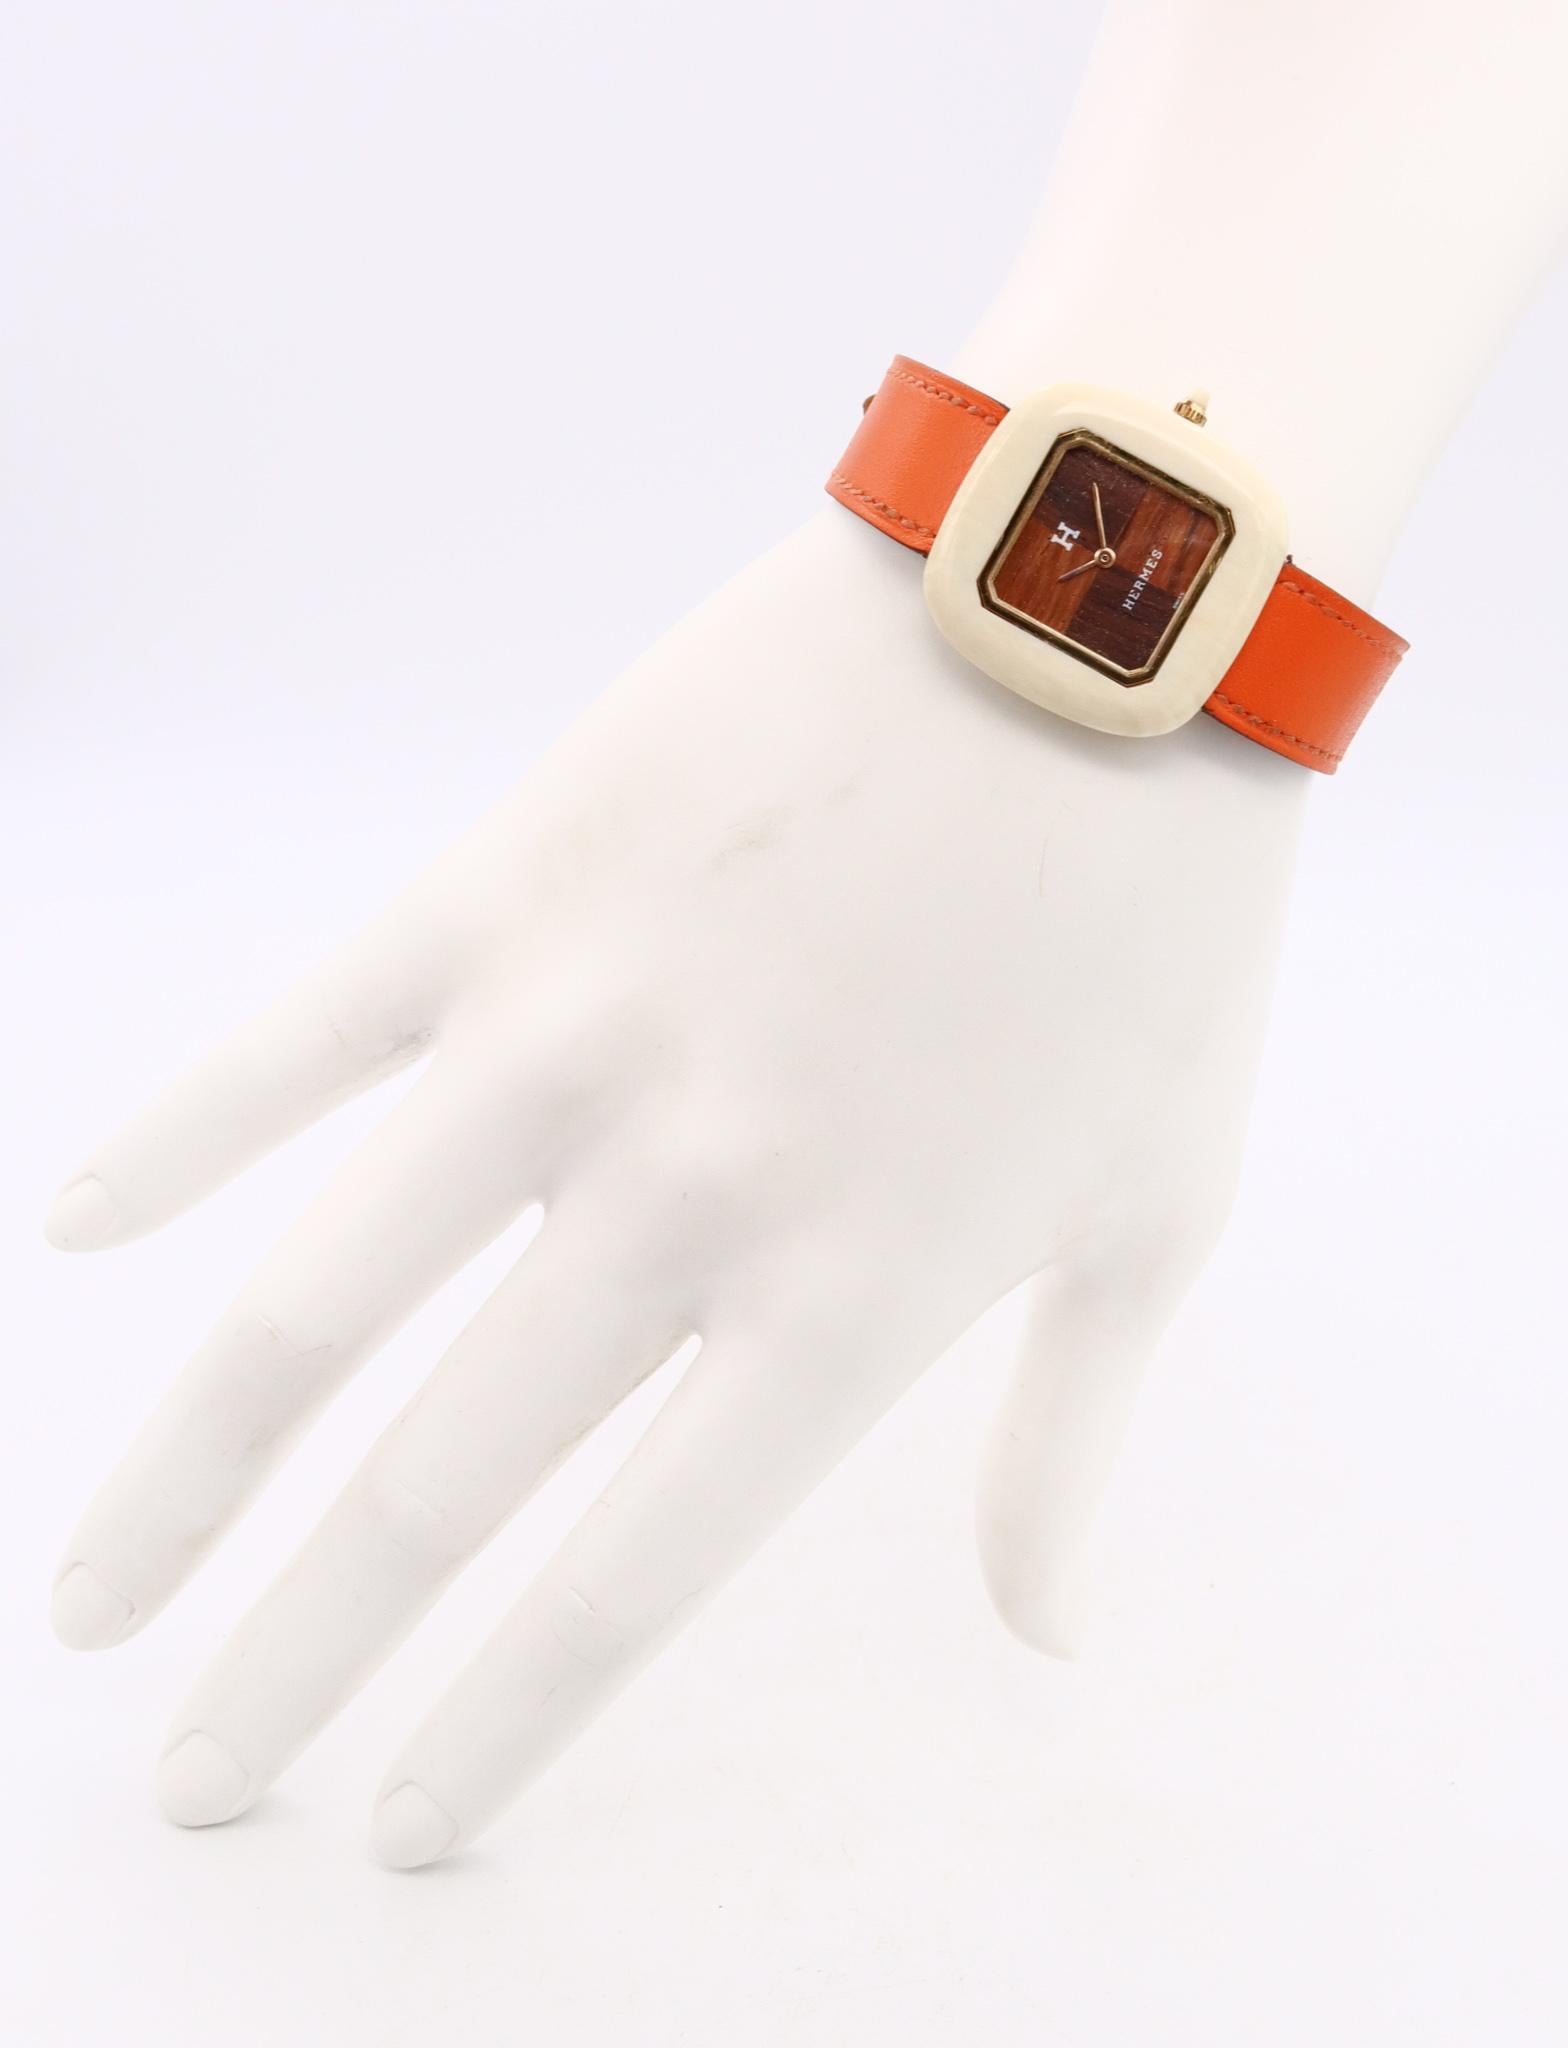 Rare vintage wristwatch designed by Hermes.

Very important collector's piece, created by the house of Hermes in Paris France, circa1970's.

The case of this wristwatch is crafted from a 30 mm by 30 mm square cushion shape, made in 18K yellow gold.